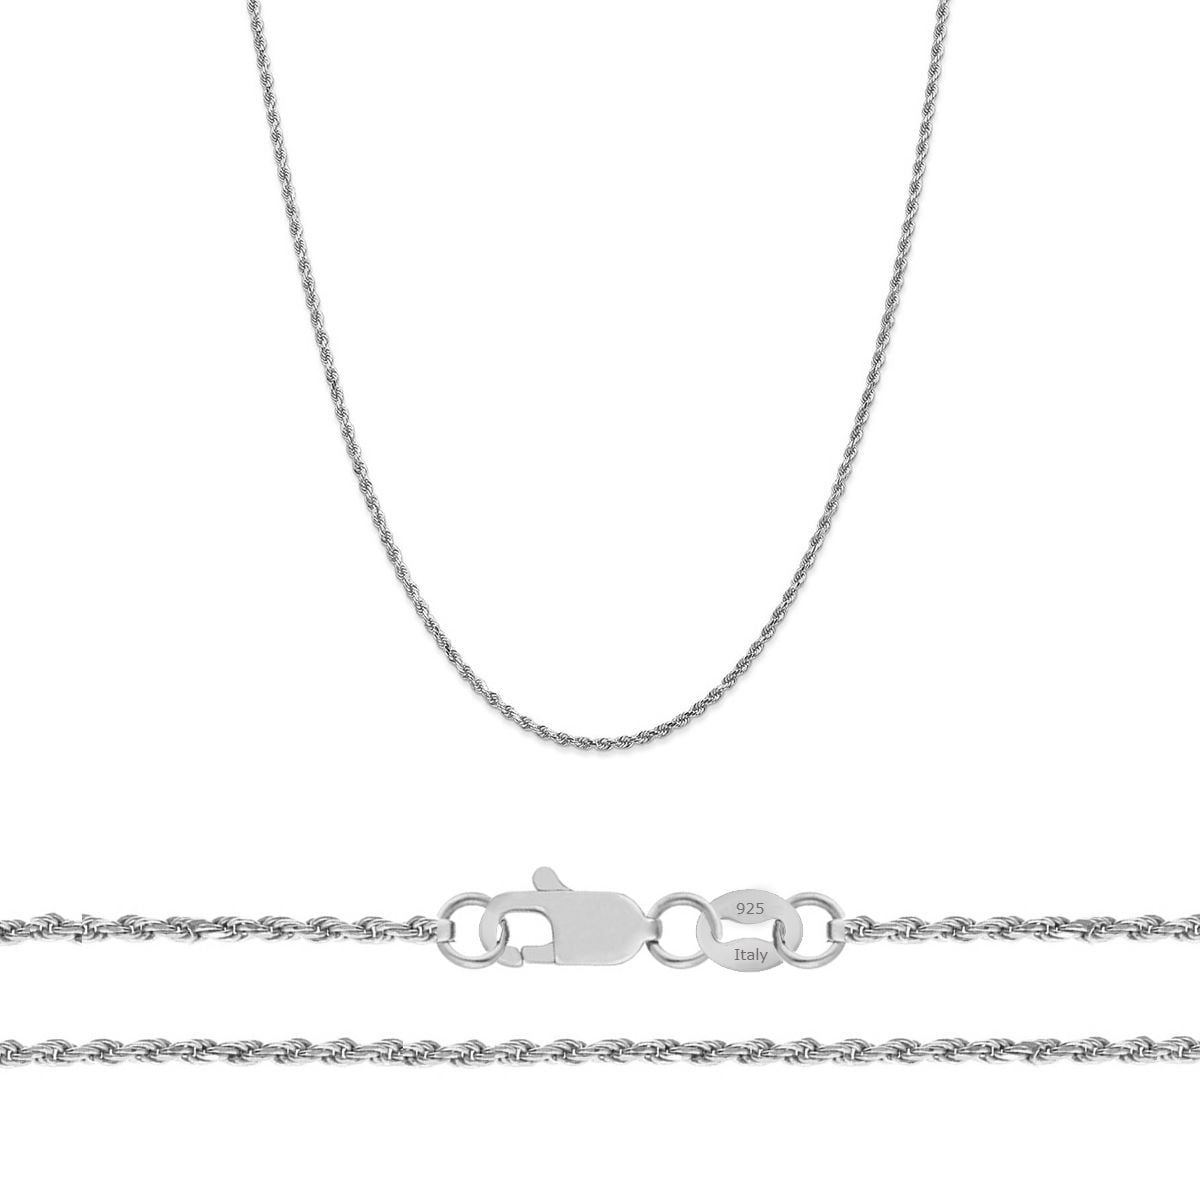 MiaBella 925 Sterling Silver Italian 1mm Diamond Cut Thin Adjustable Round Box Bolo Chain Necklace Jewelry for Women Choice of White or 18K Yellow Gold Over Silver 24 inch